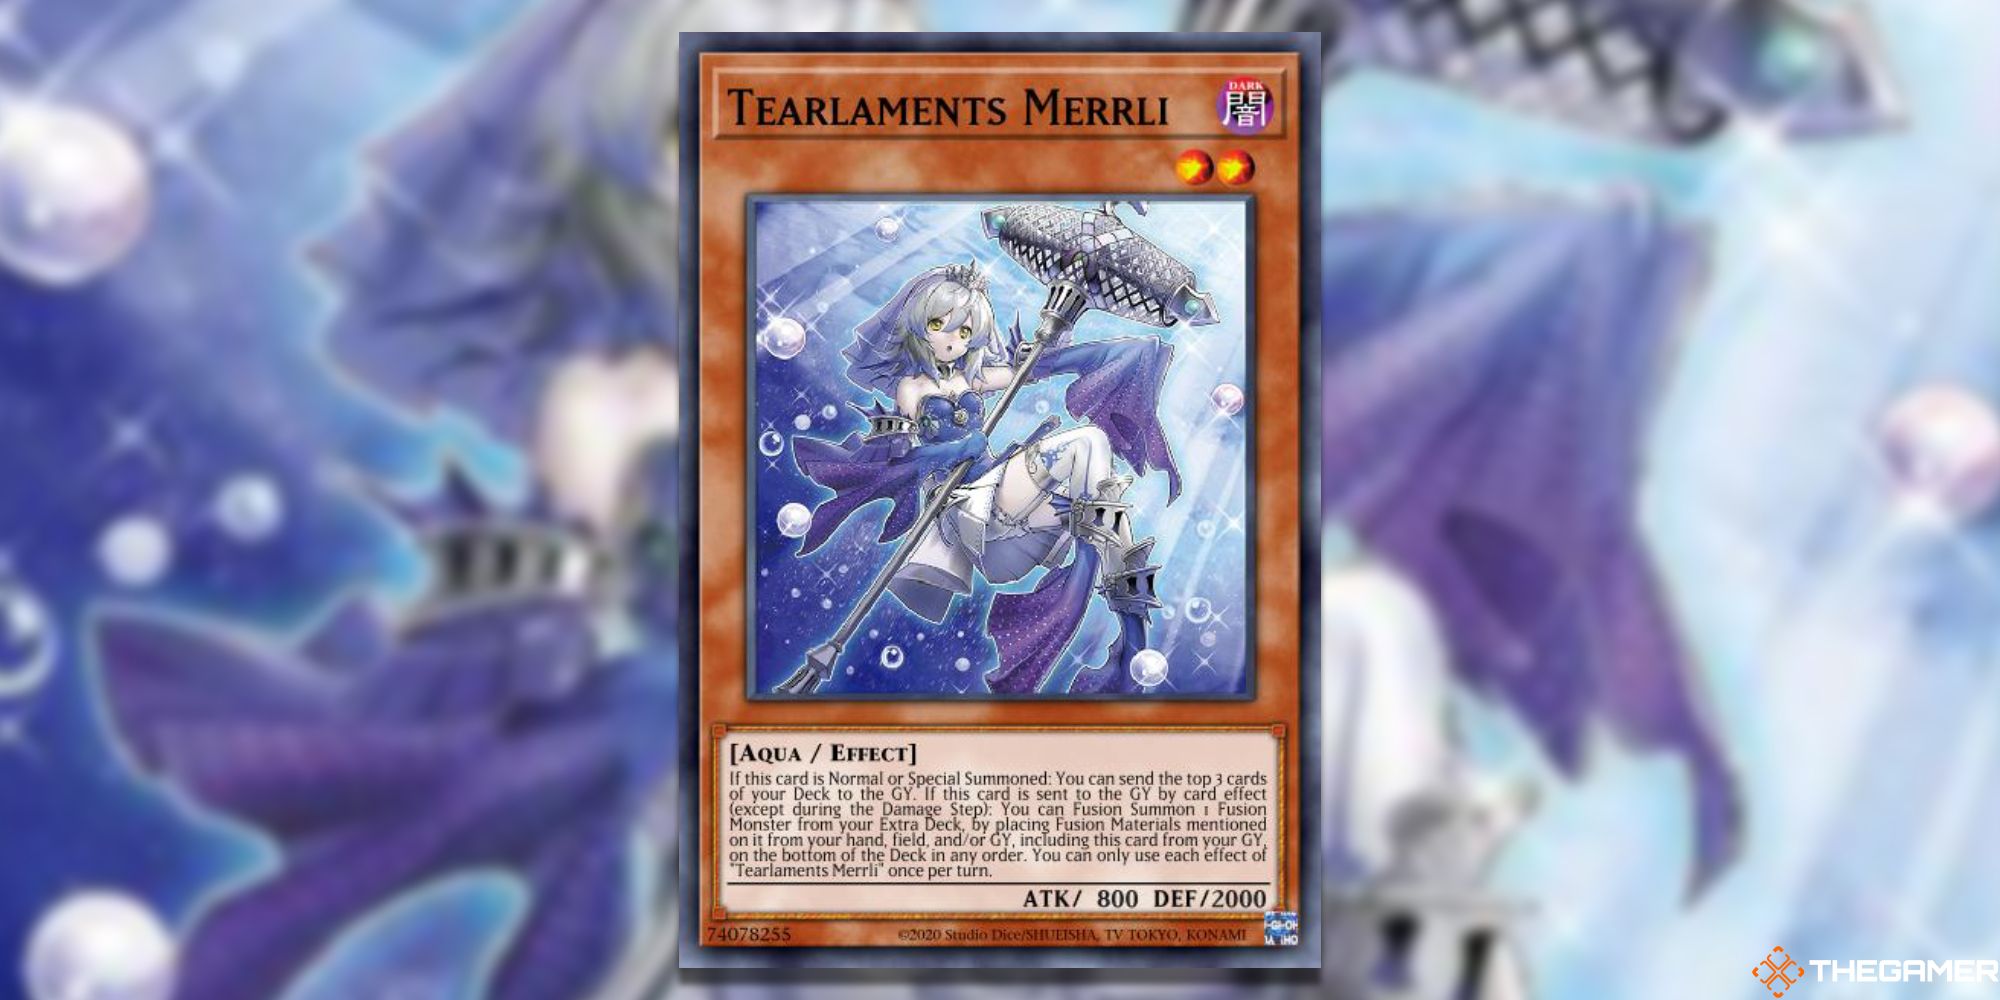 Full Card Art Master Duel with Gaussian Blur by Yu-Gi-Oh!